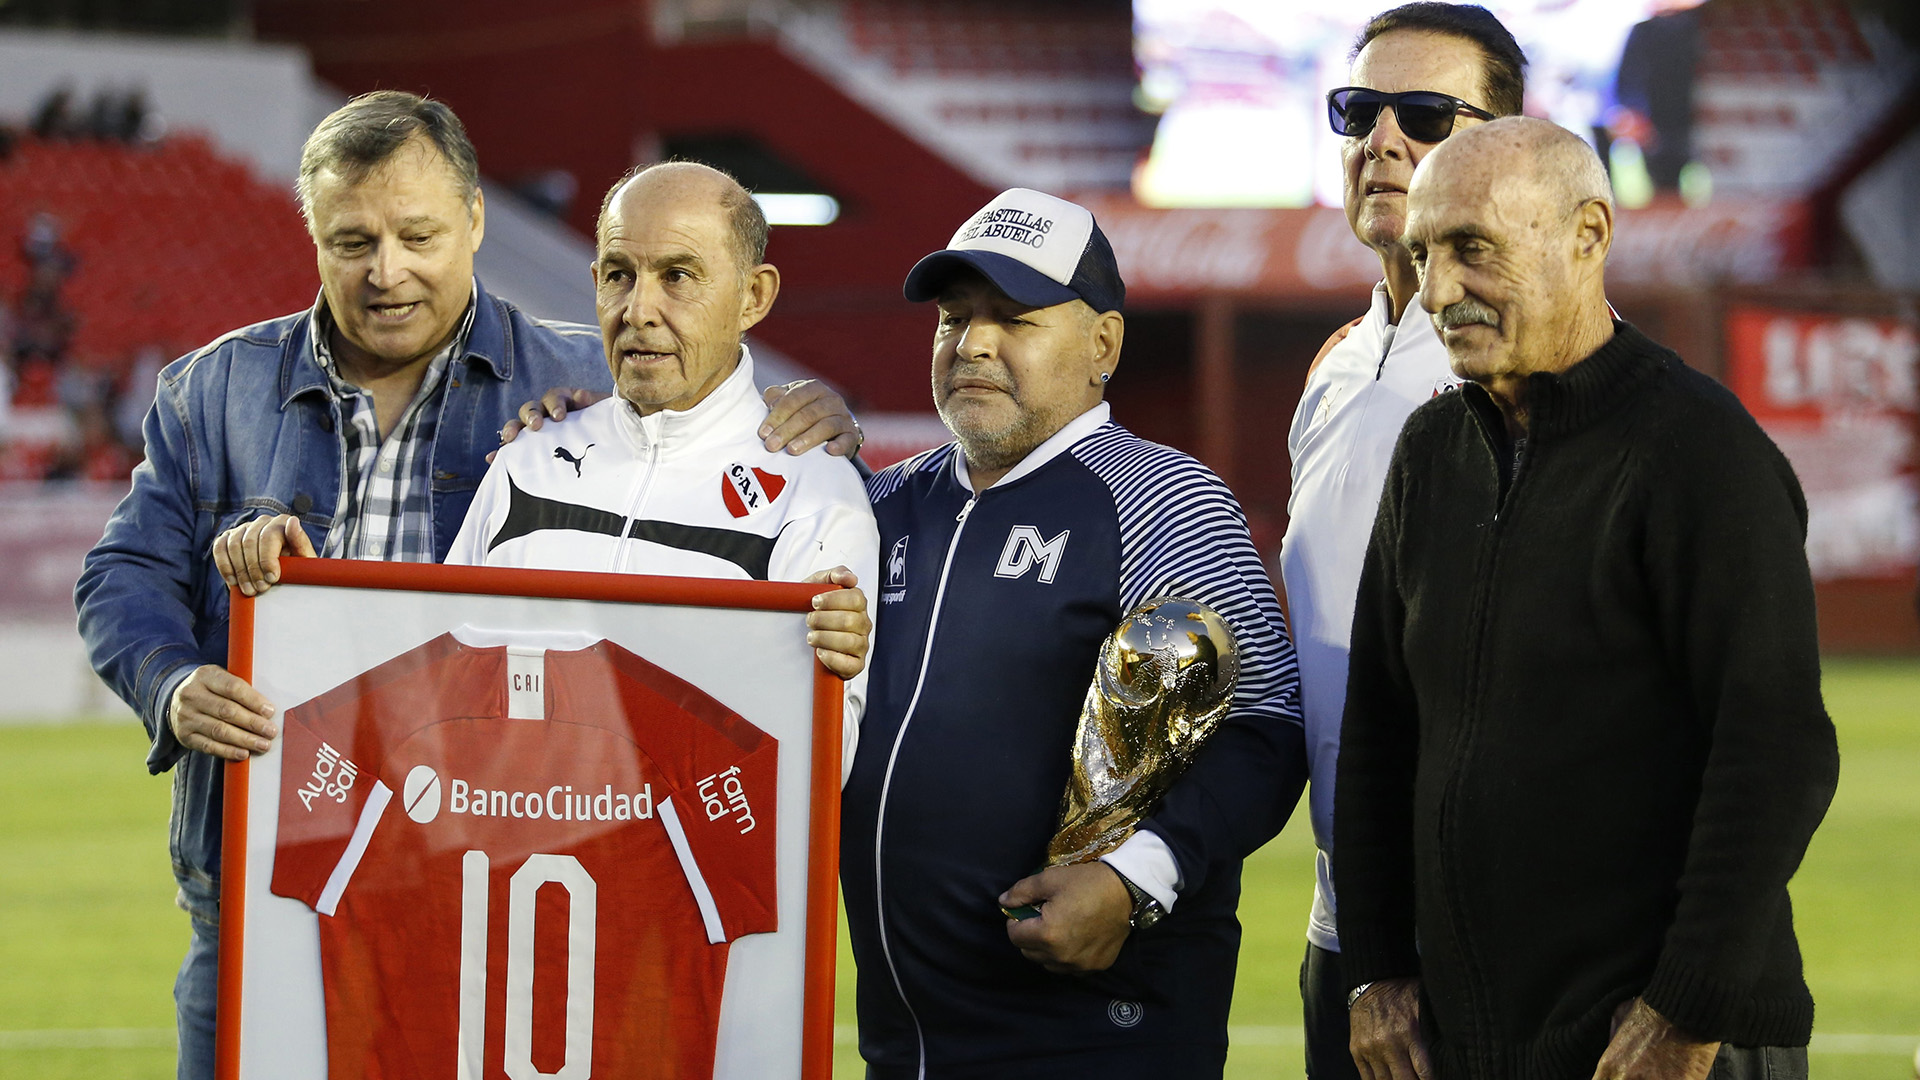 Bertoni, Bochini, Maradona, Santoro, Pavoni and the cup made by Eliana Pantano, the last time Diego set foot on the Independiente court (FotoBaires)